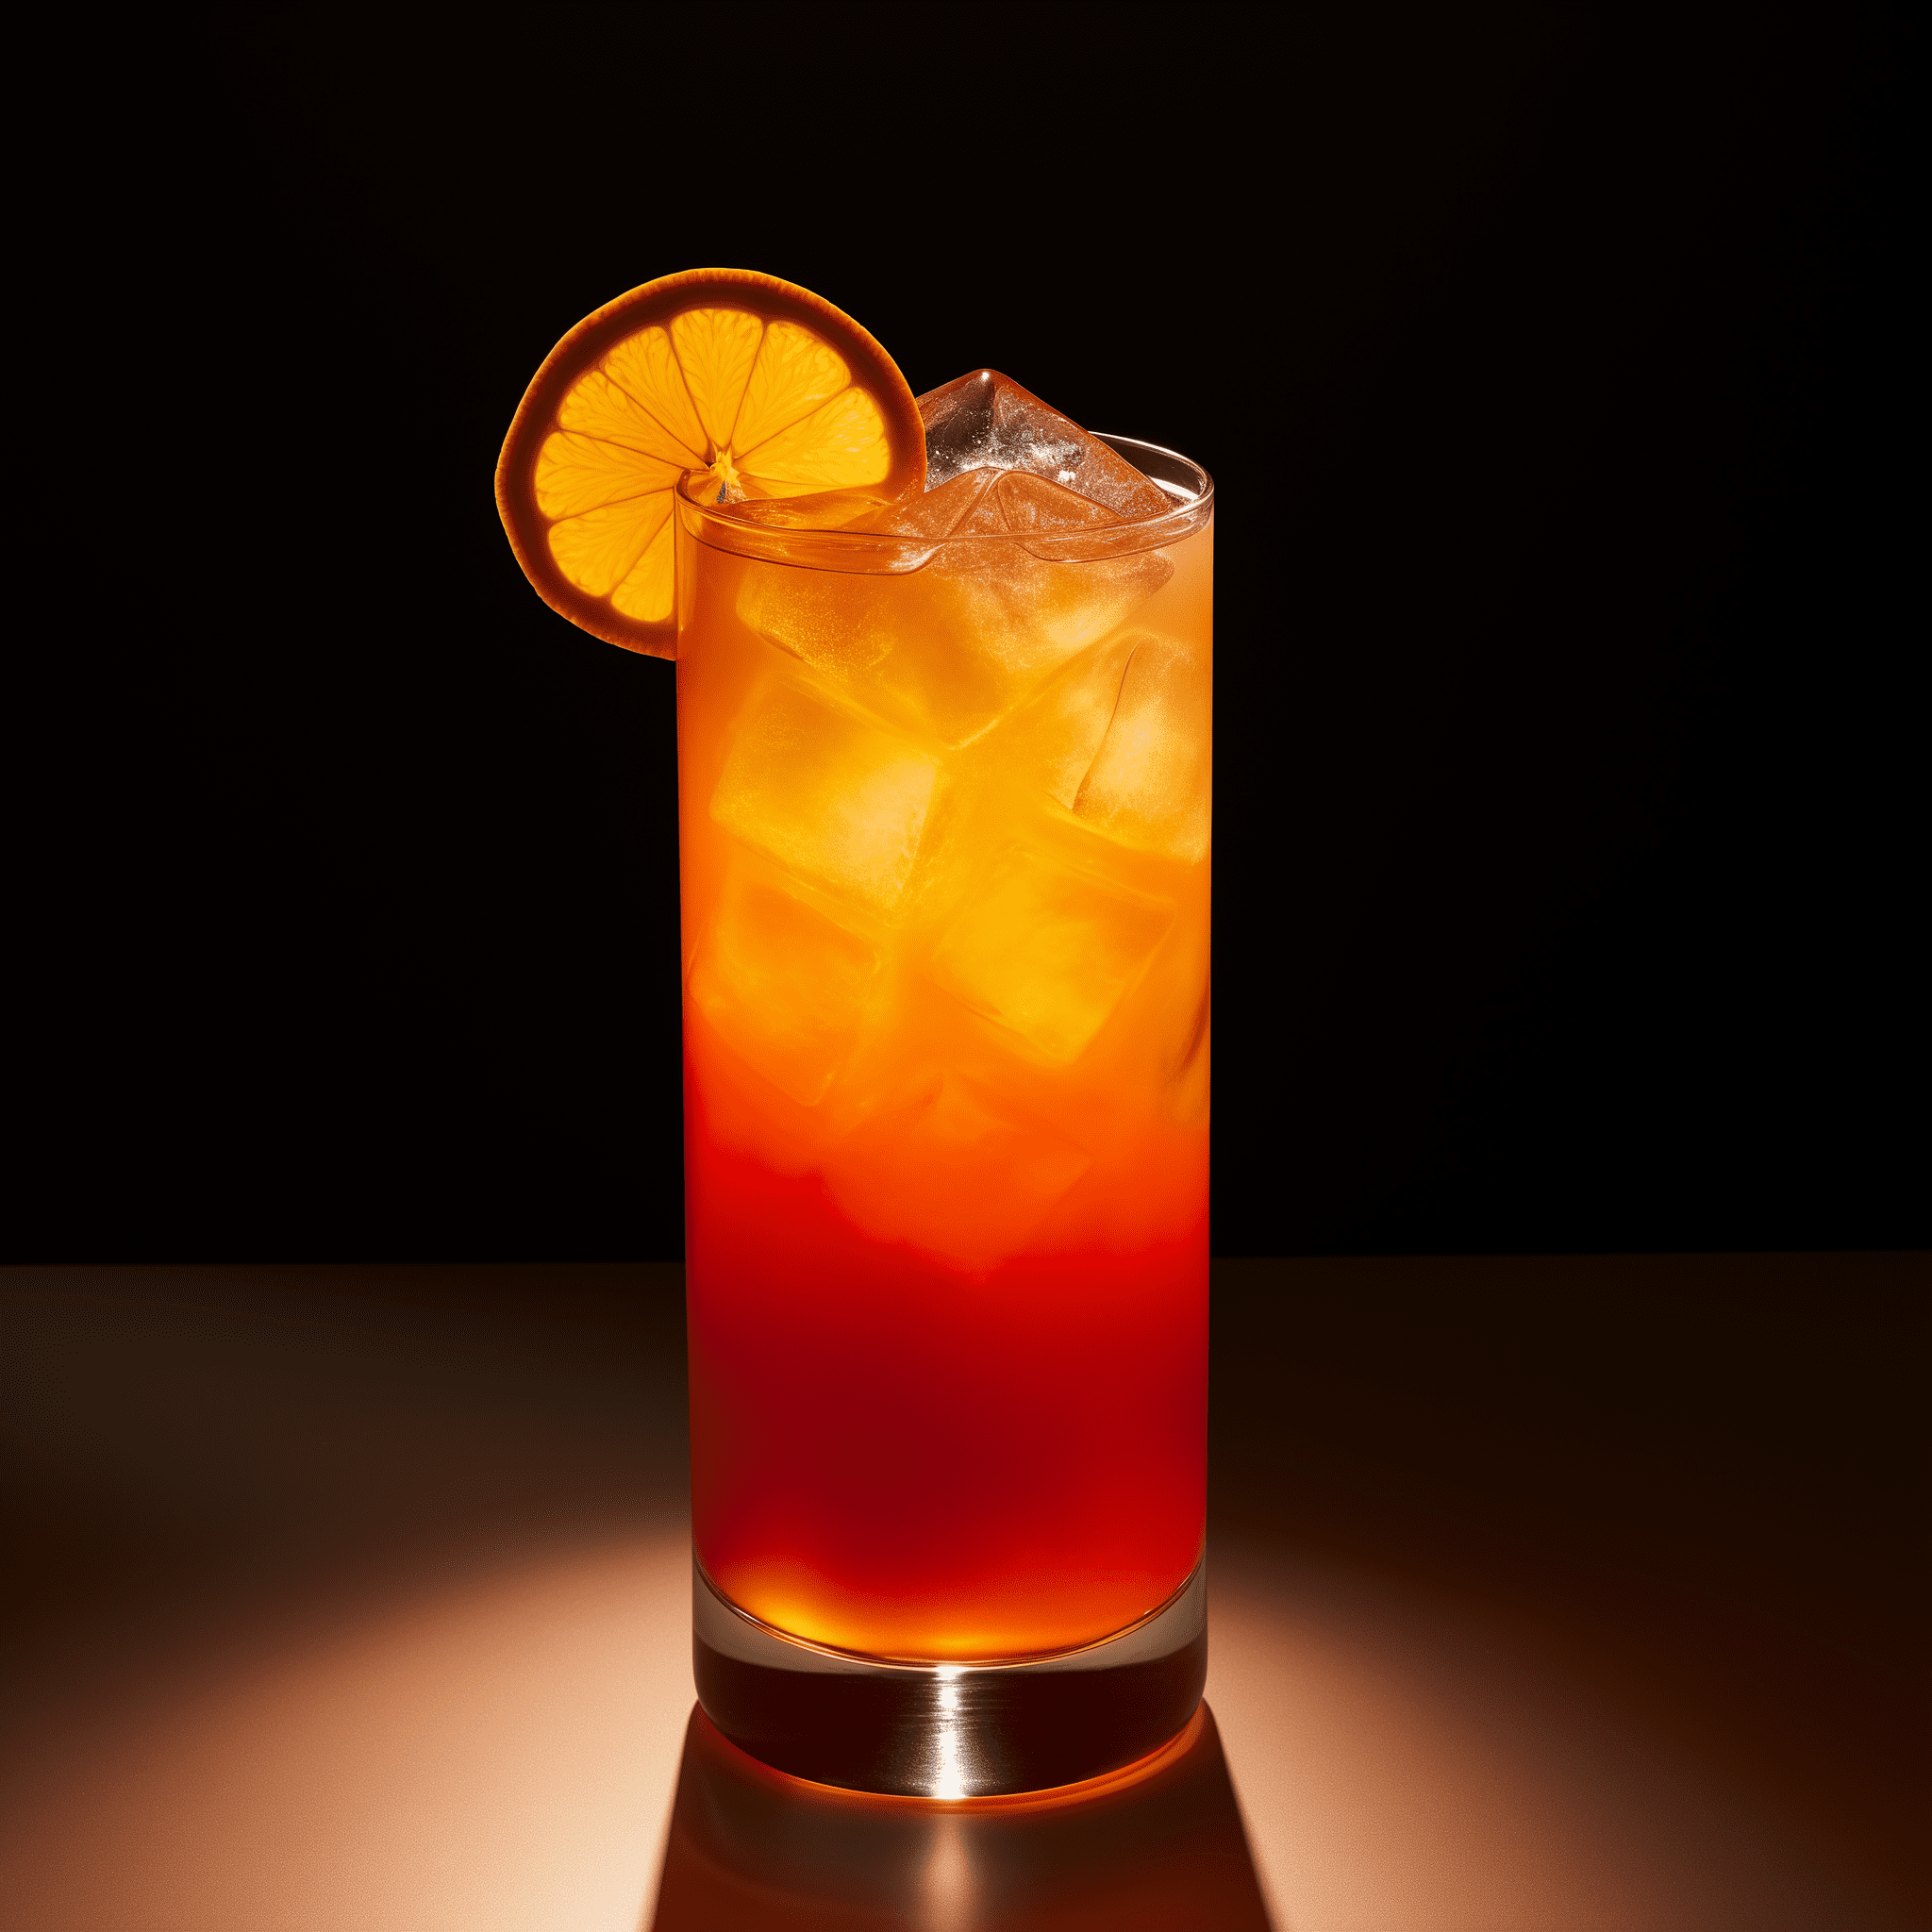 Wild Screw Cocktail Recipe - The Wild Screw offers a bold flavor profile with the warmth of bourbon, the sweetness of mango, and the citrus kick of orange juice. It's a harmonious blend that is both refreshing and assertive.